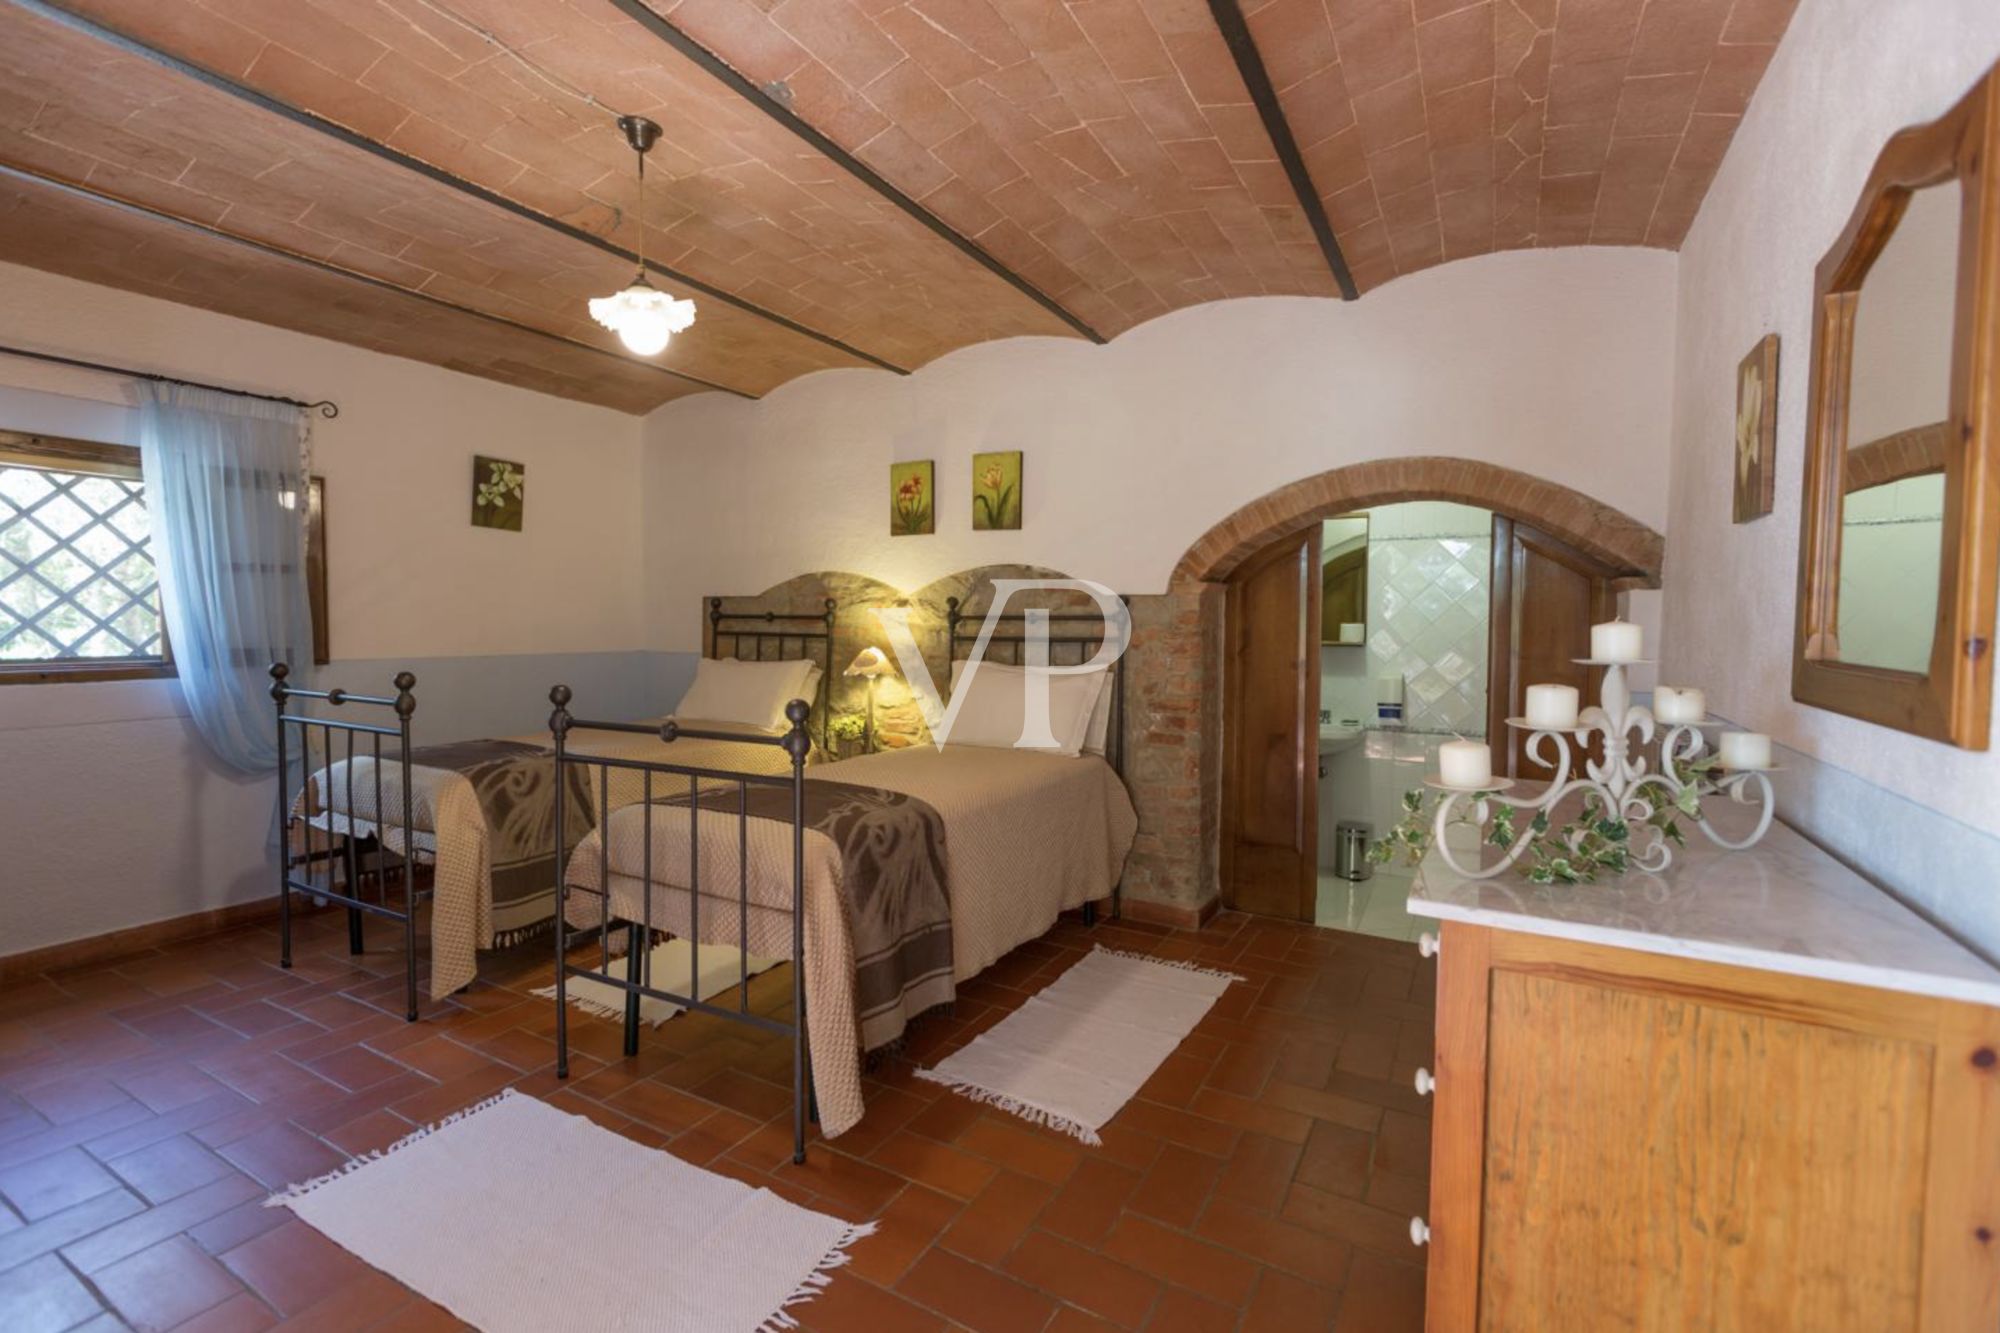 Historic Tuscan farmhouse in an idyllic location with agriturismo and a wide range of leisure activities